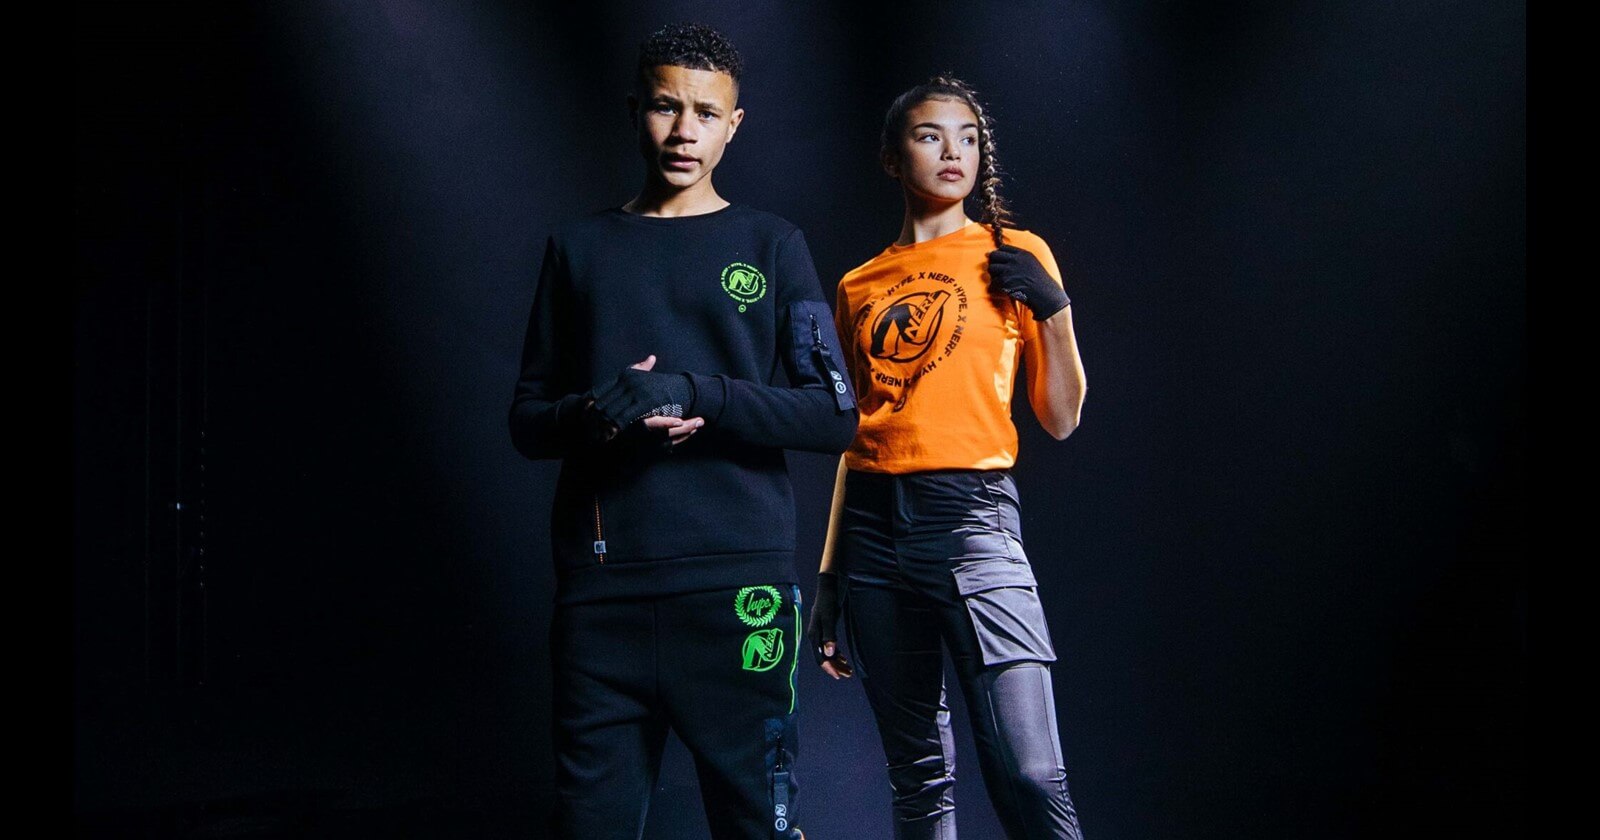 Lifestyle Brand HYPE. Celebrates Capsule Collection and Limited-Edition Blasters with NERF image